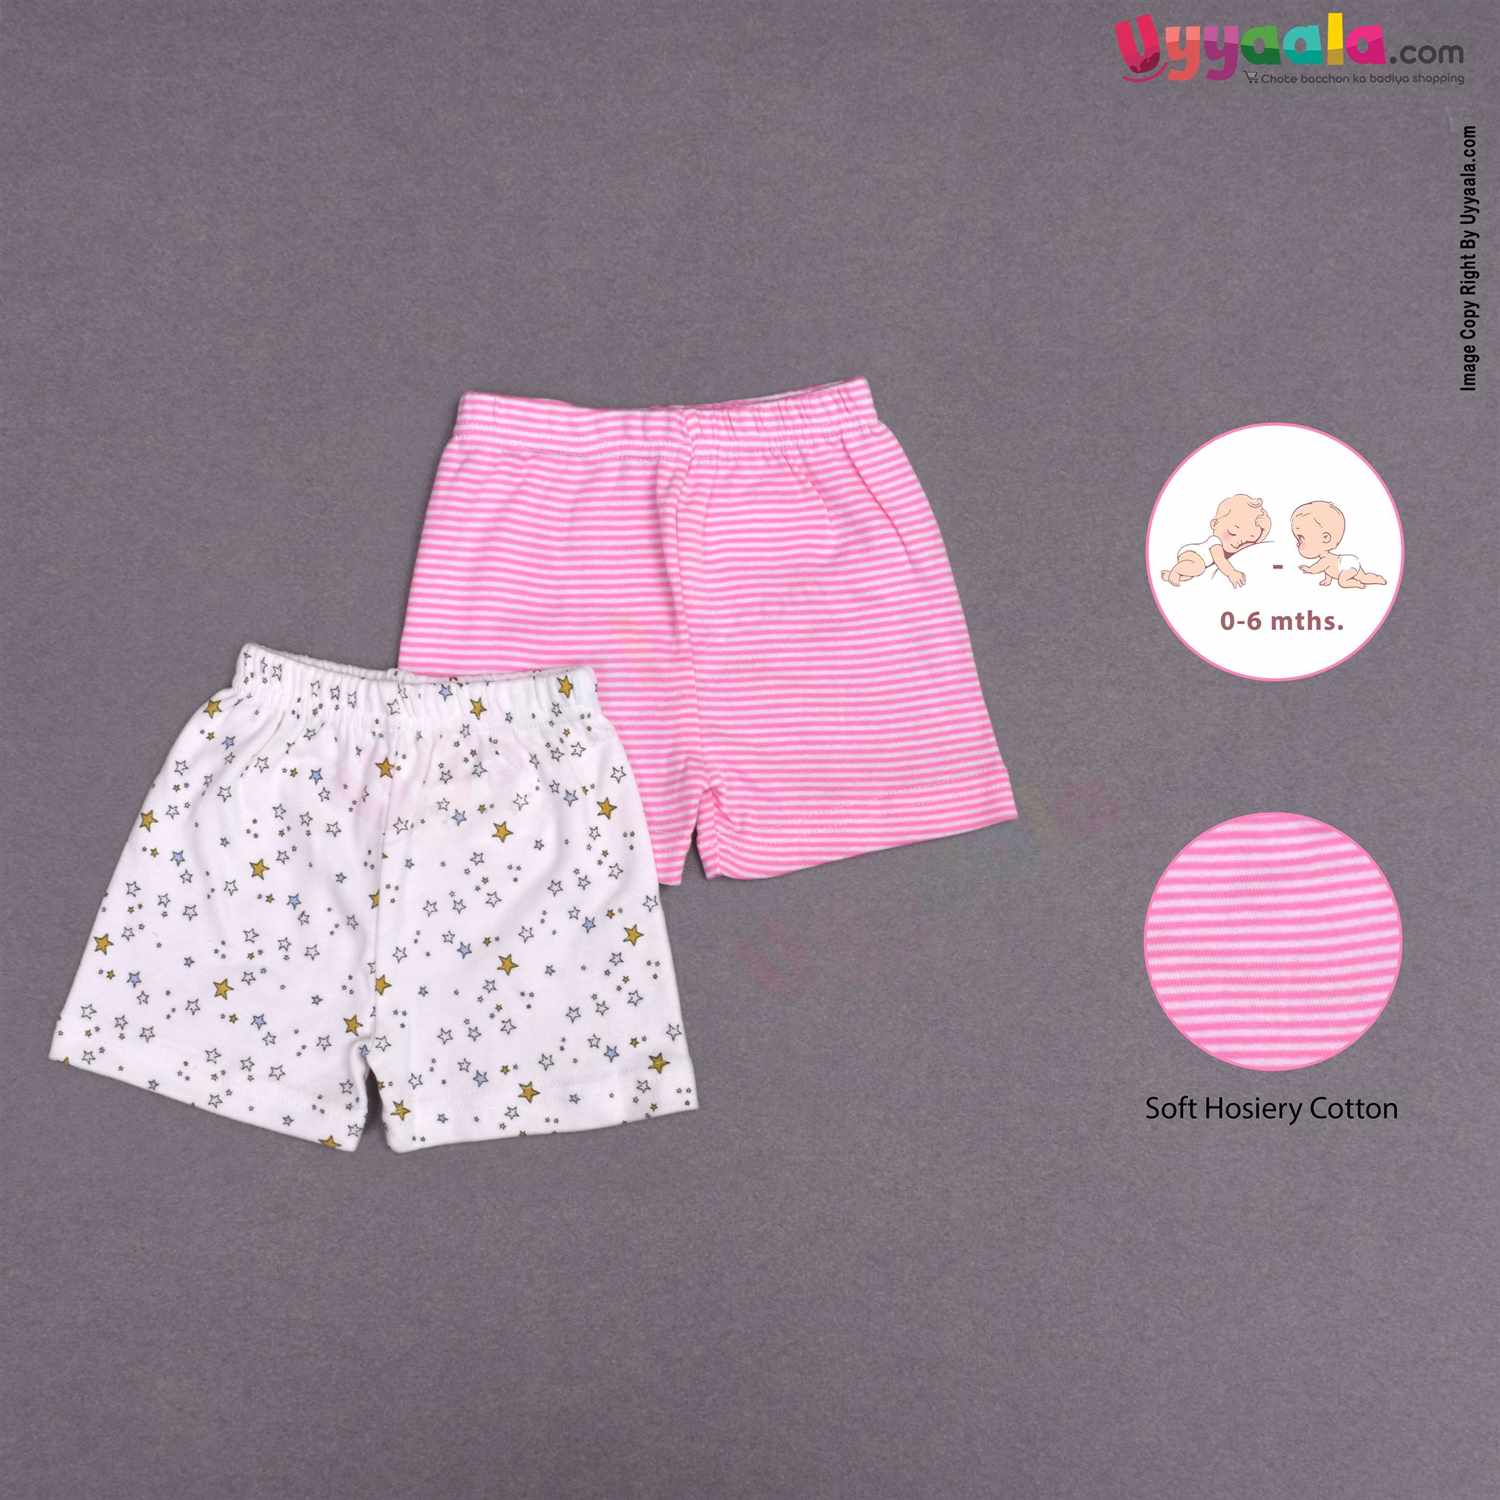 Precious One Shorts 100% Soft Hosiery Cotton Pack of 2 - Pink & Cream (0-6M)